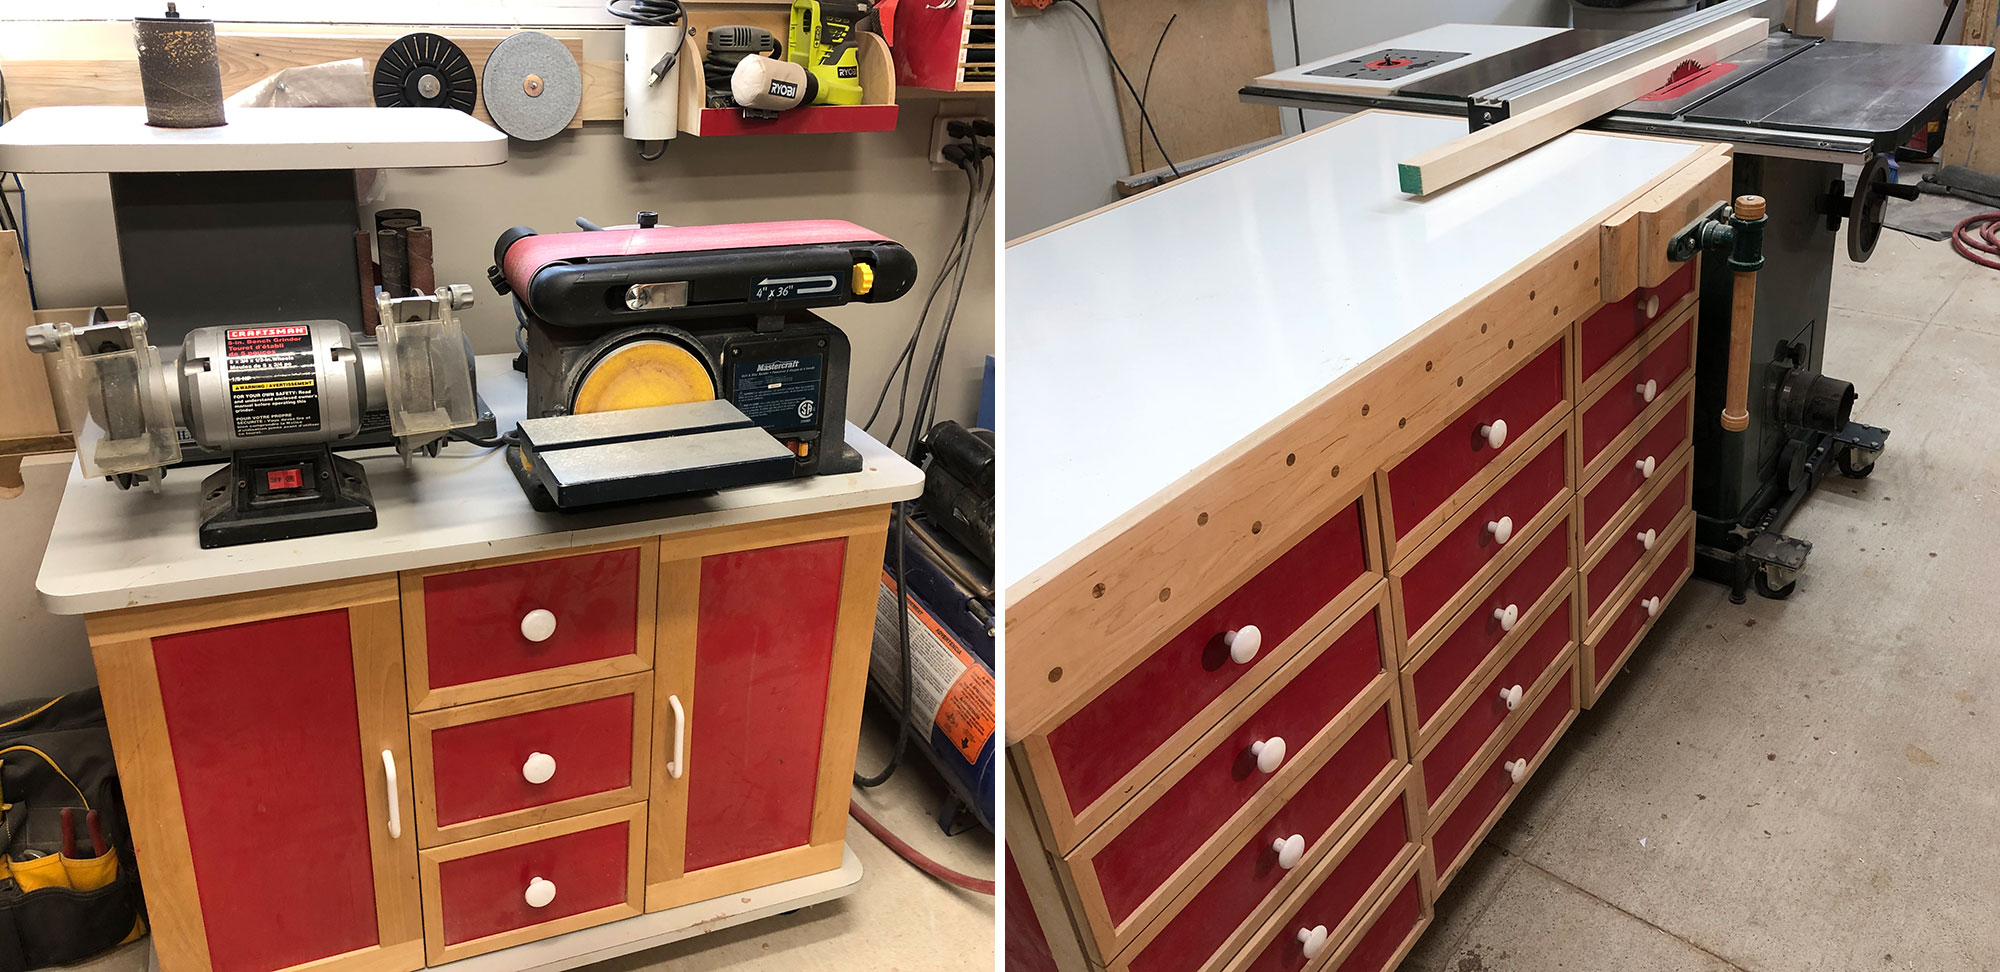 Image 1: Grinder and sanding station. Image 2: Workbench with storage drawers beside table saw.